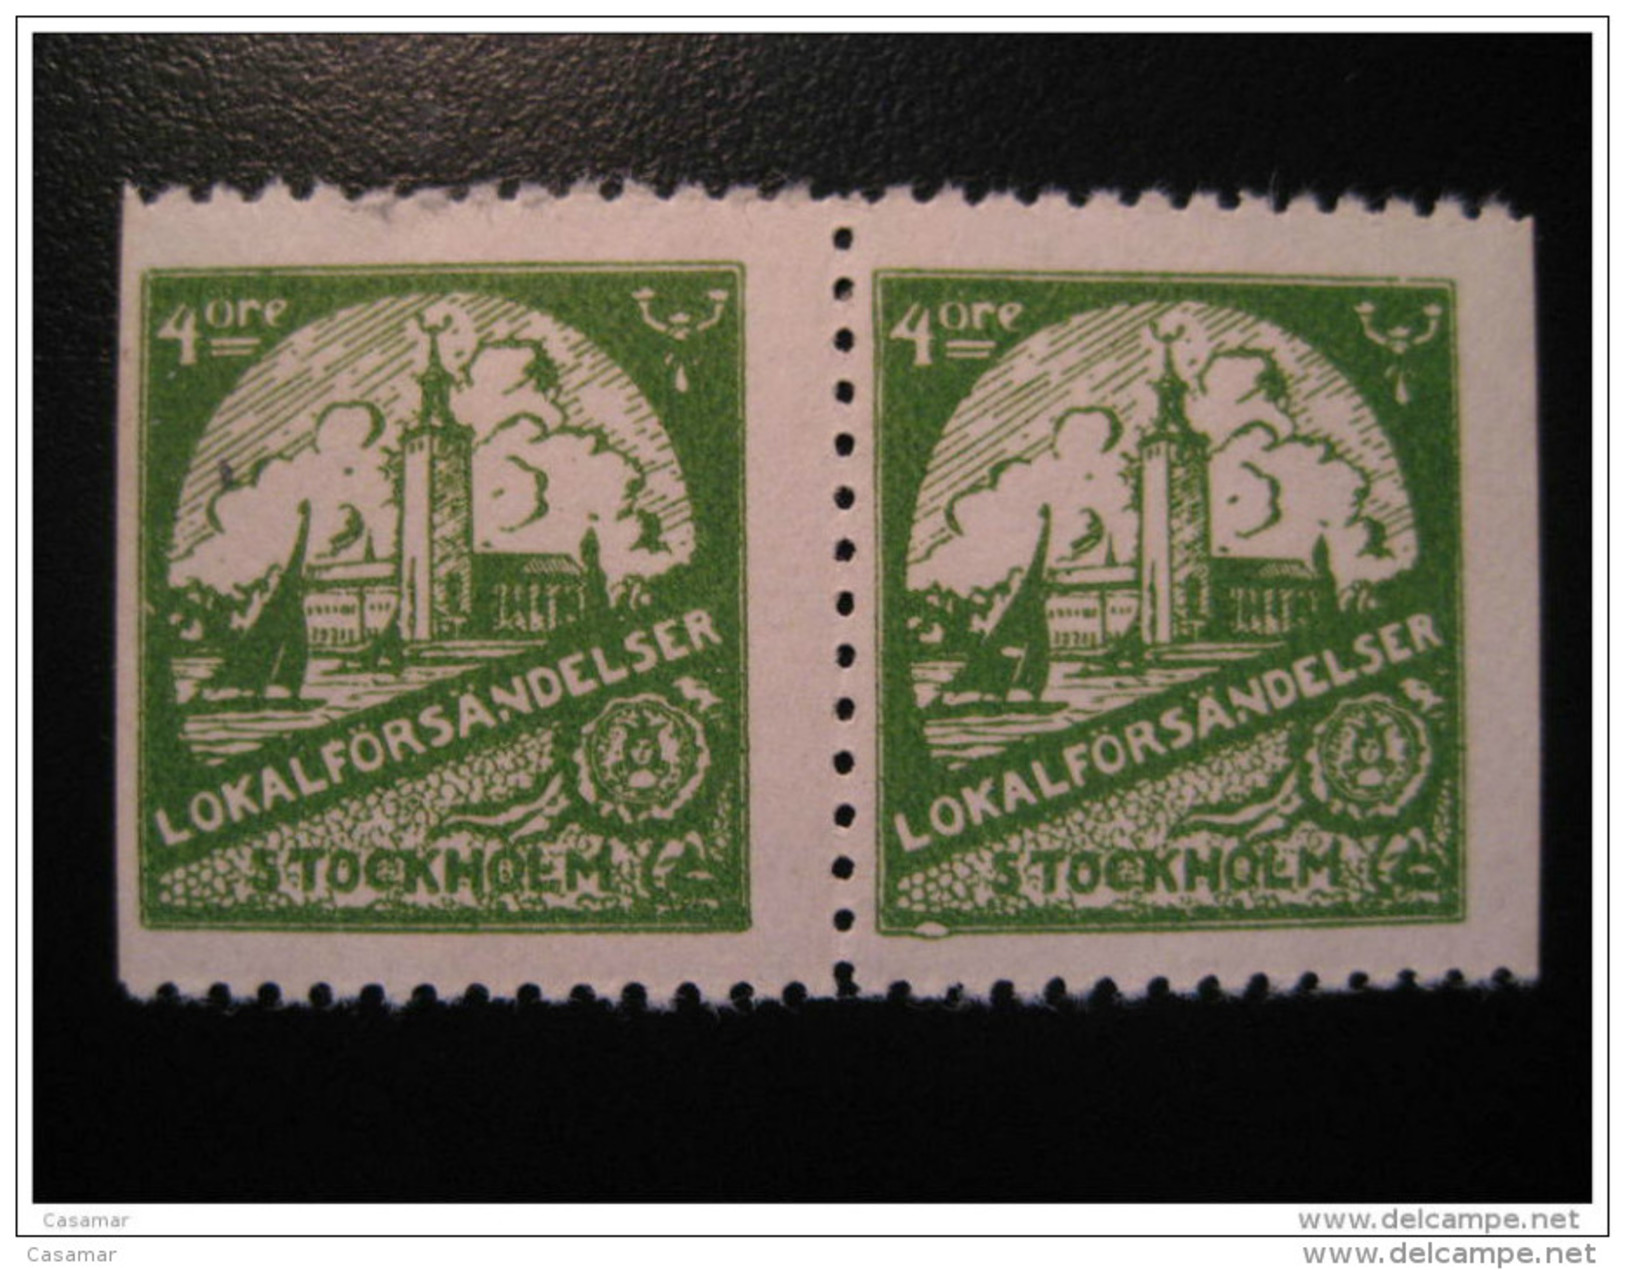 Stockholm Pair 4 Ore Local Stamp - Lokale Uitgaven